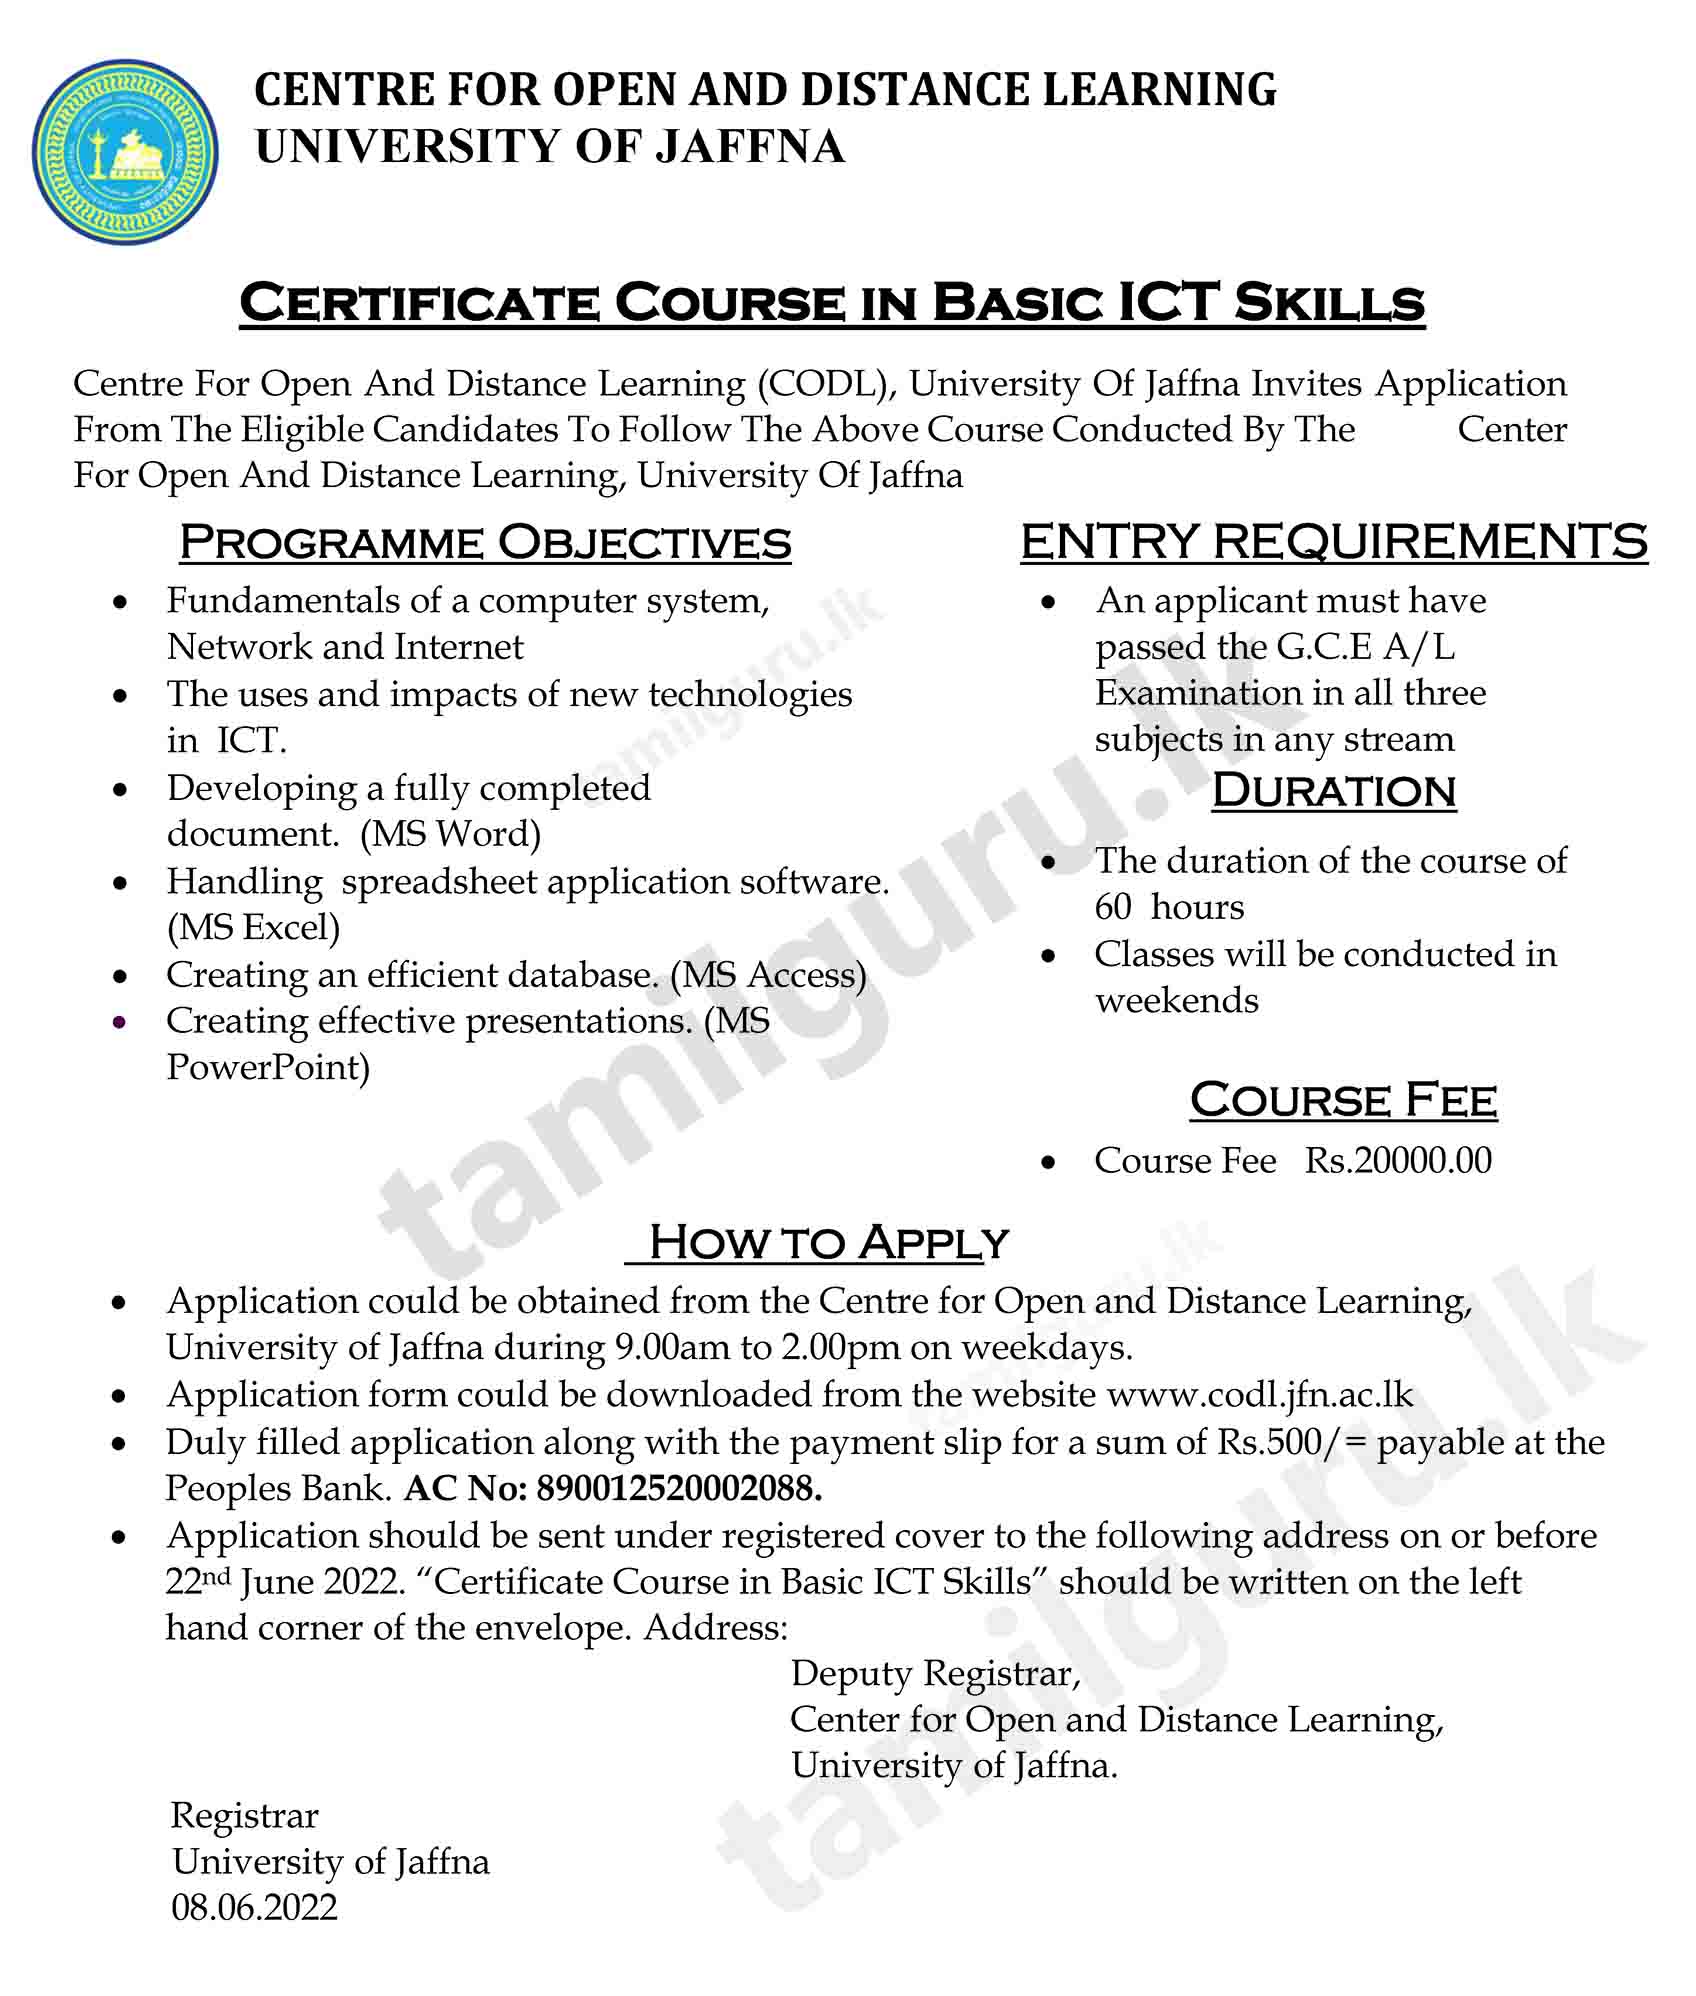 Full Detailed Notice for Certificate Course in Basic ICT Skills (2022) - University of Jaffna